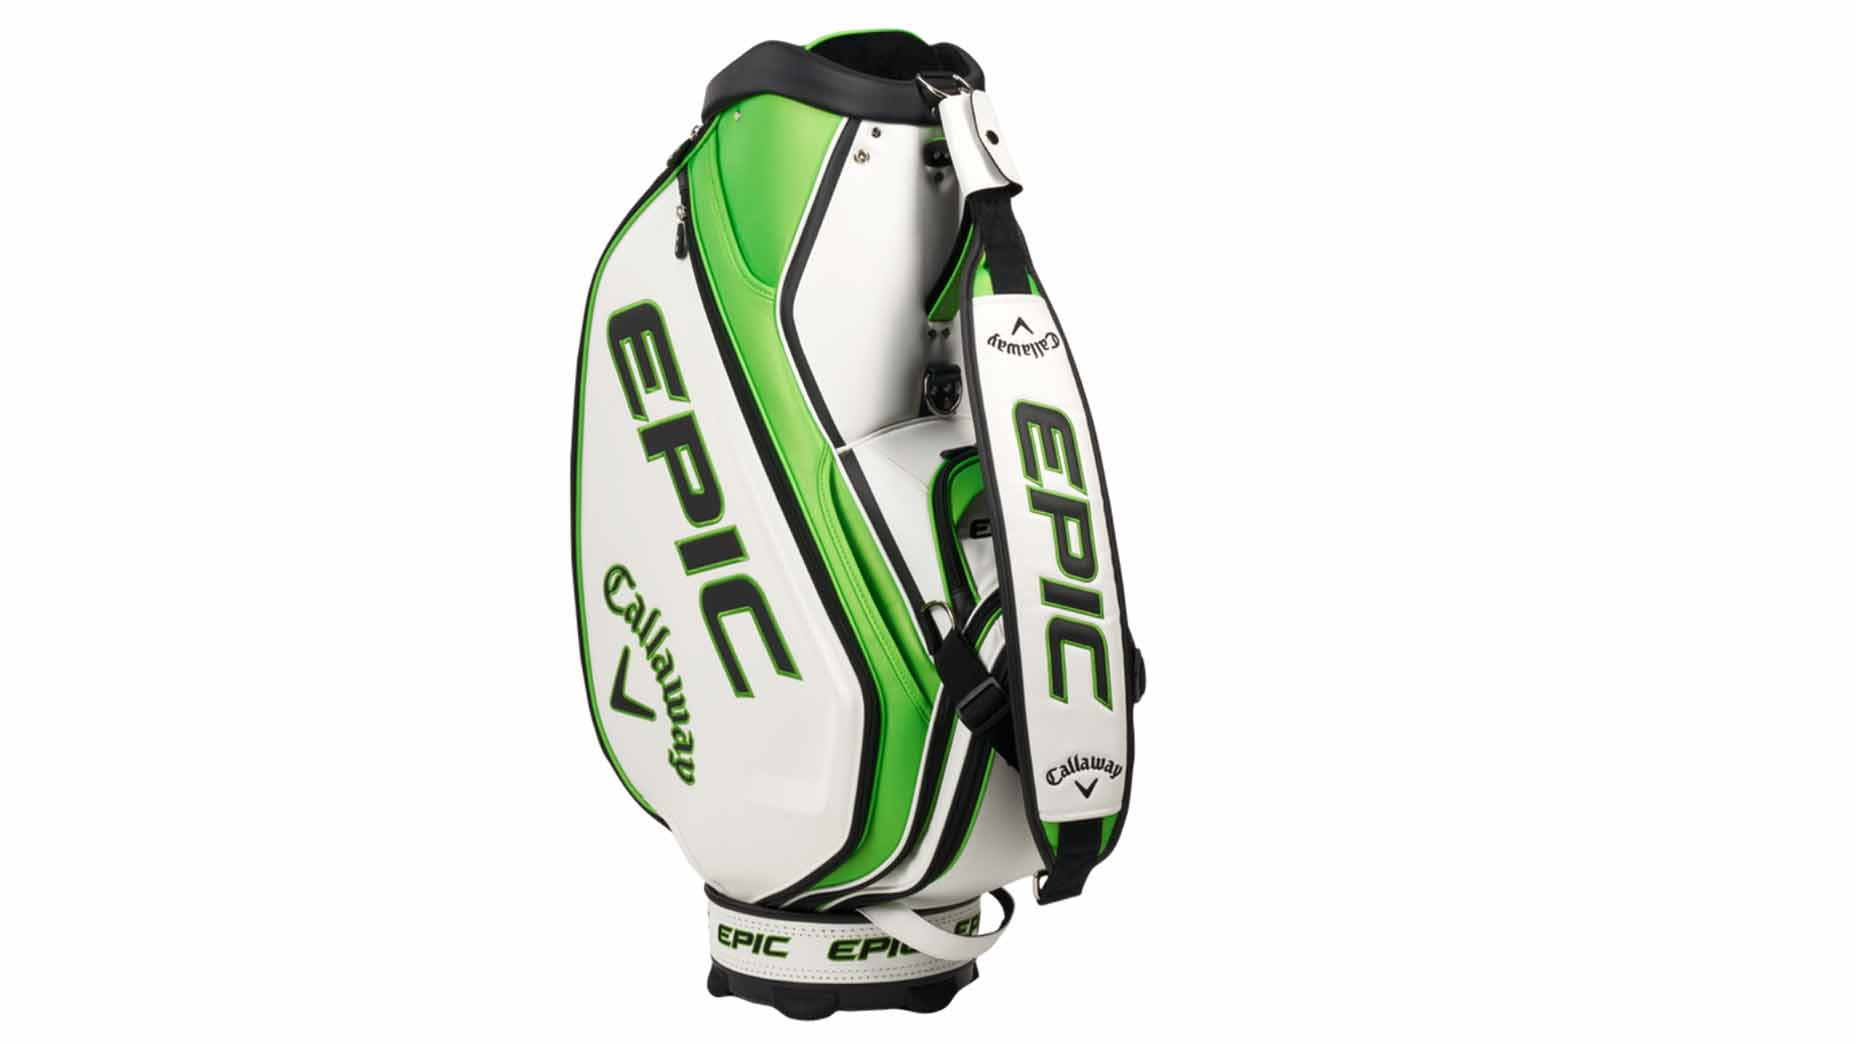 The best golf bags at every price point: Best of 2021/2022